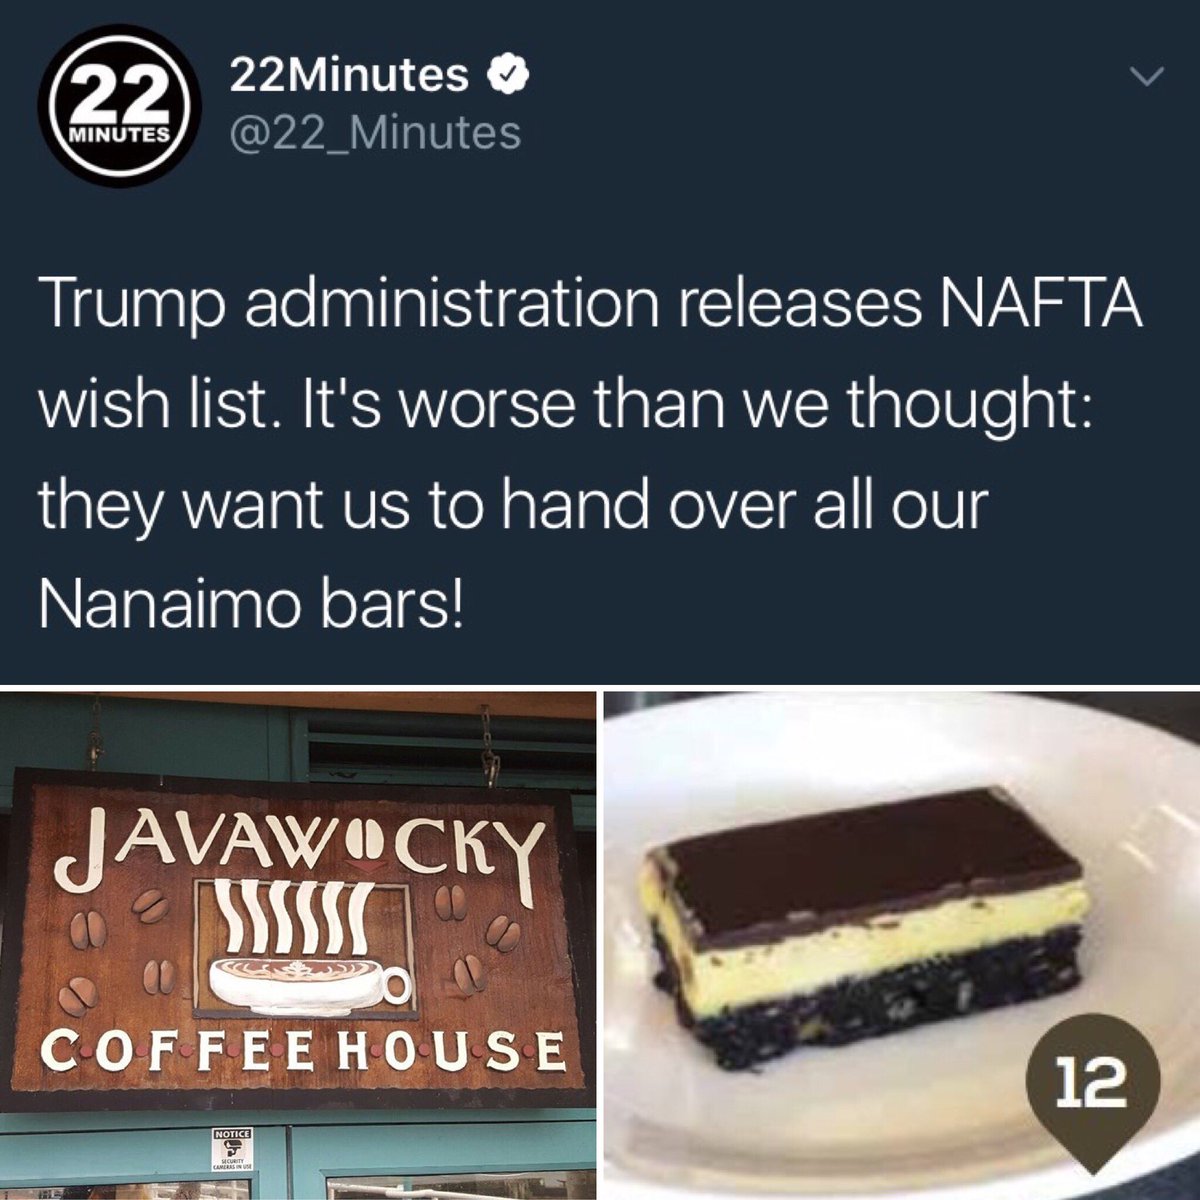 They'll never take our #Nanaimo Bars or jeopardize our #12 spot on the delicious Nanaimo Bar Trail without a fight! #NAFTA #NanaimoBar #HaHa